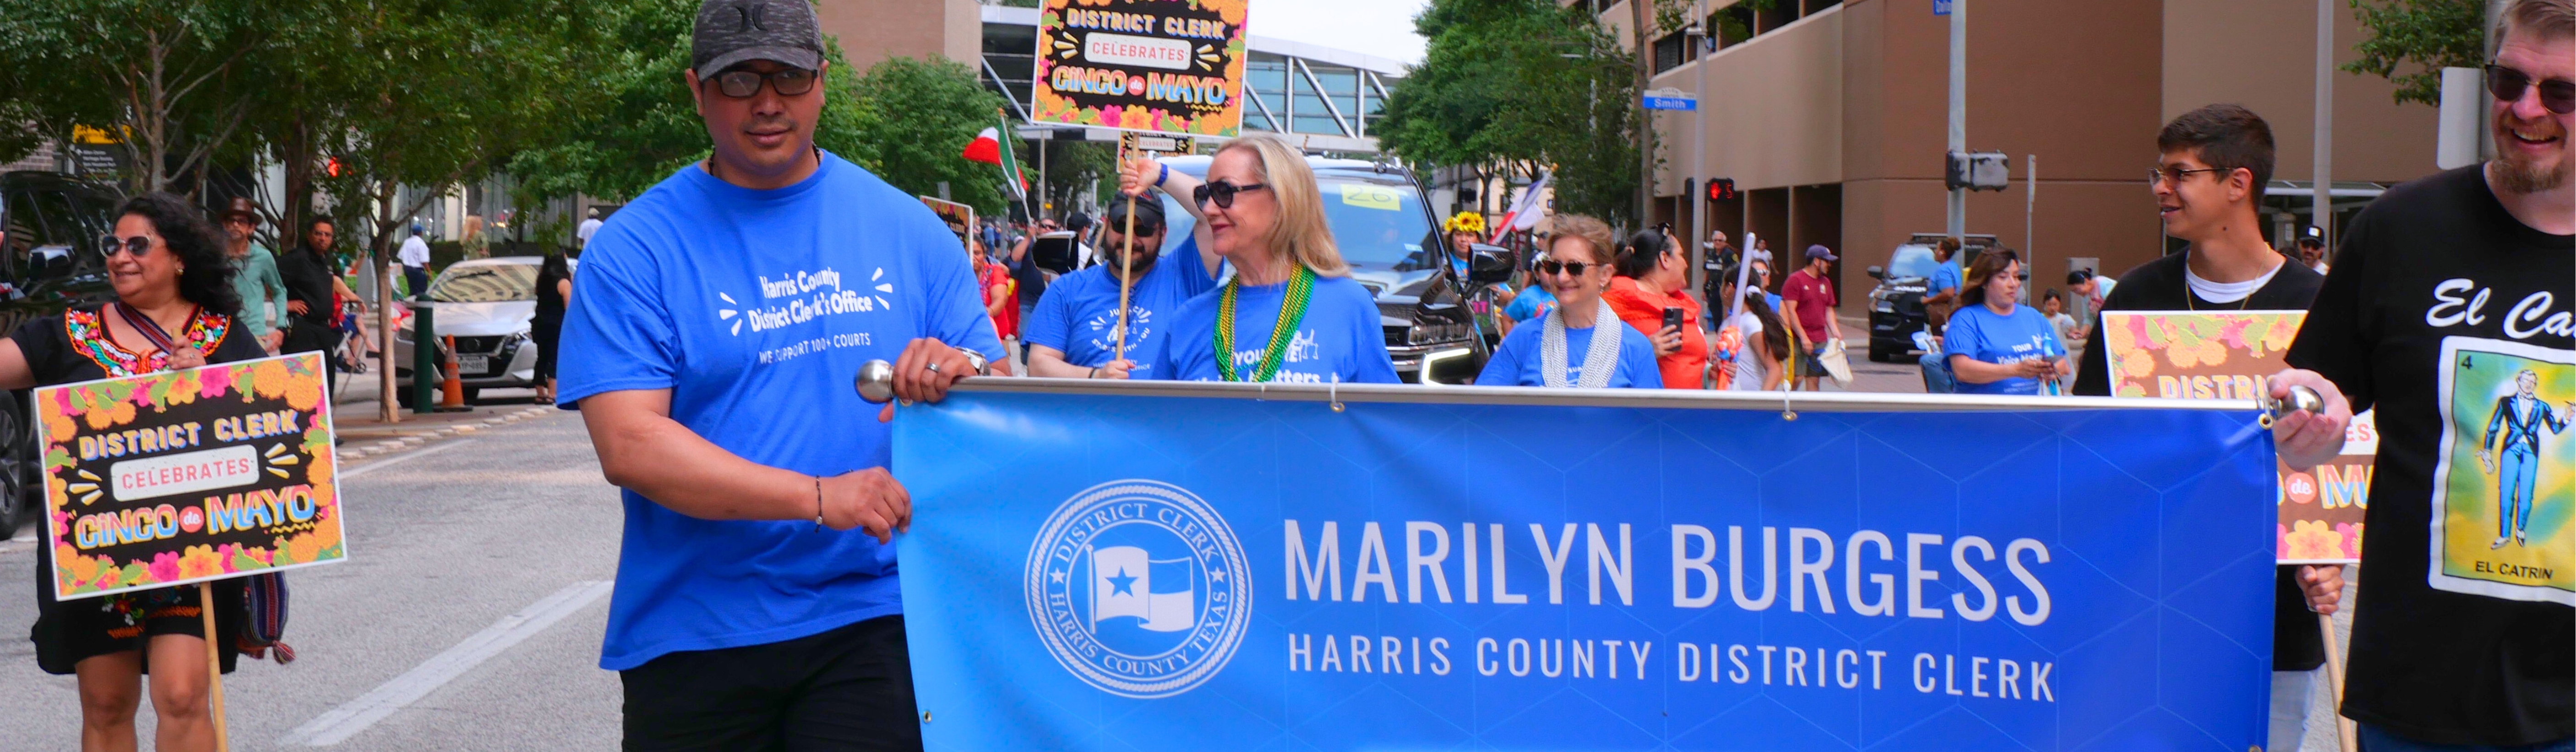  image of District Clerk Marilyn Burgess and team at Cinco de Mayo Parade.